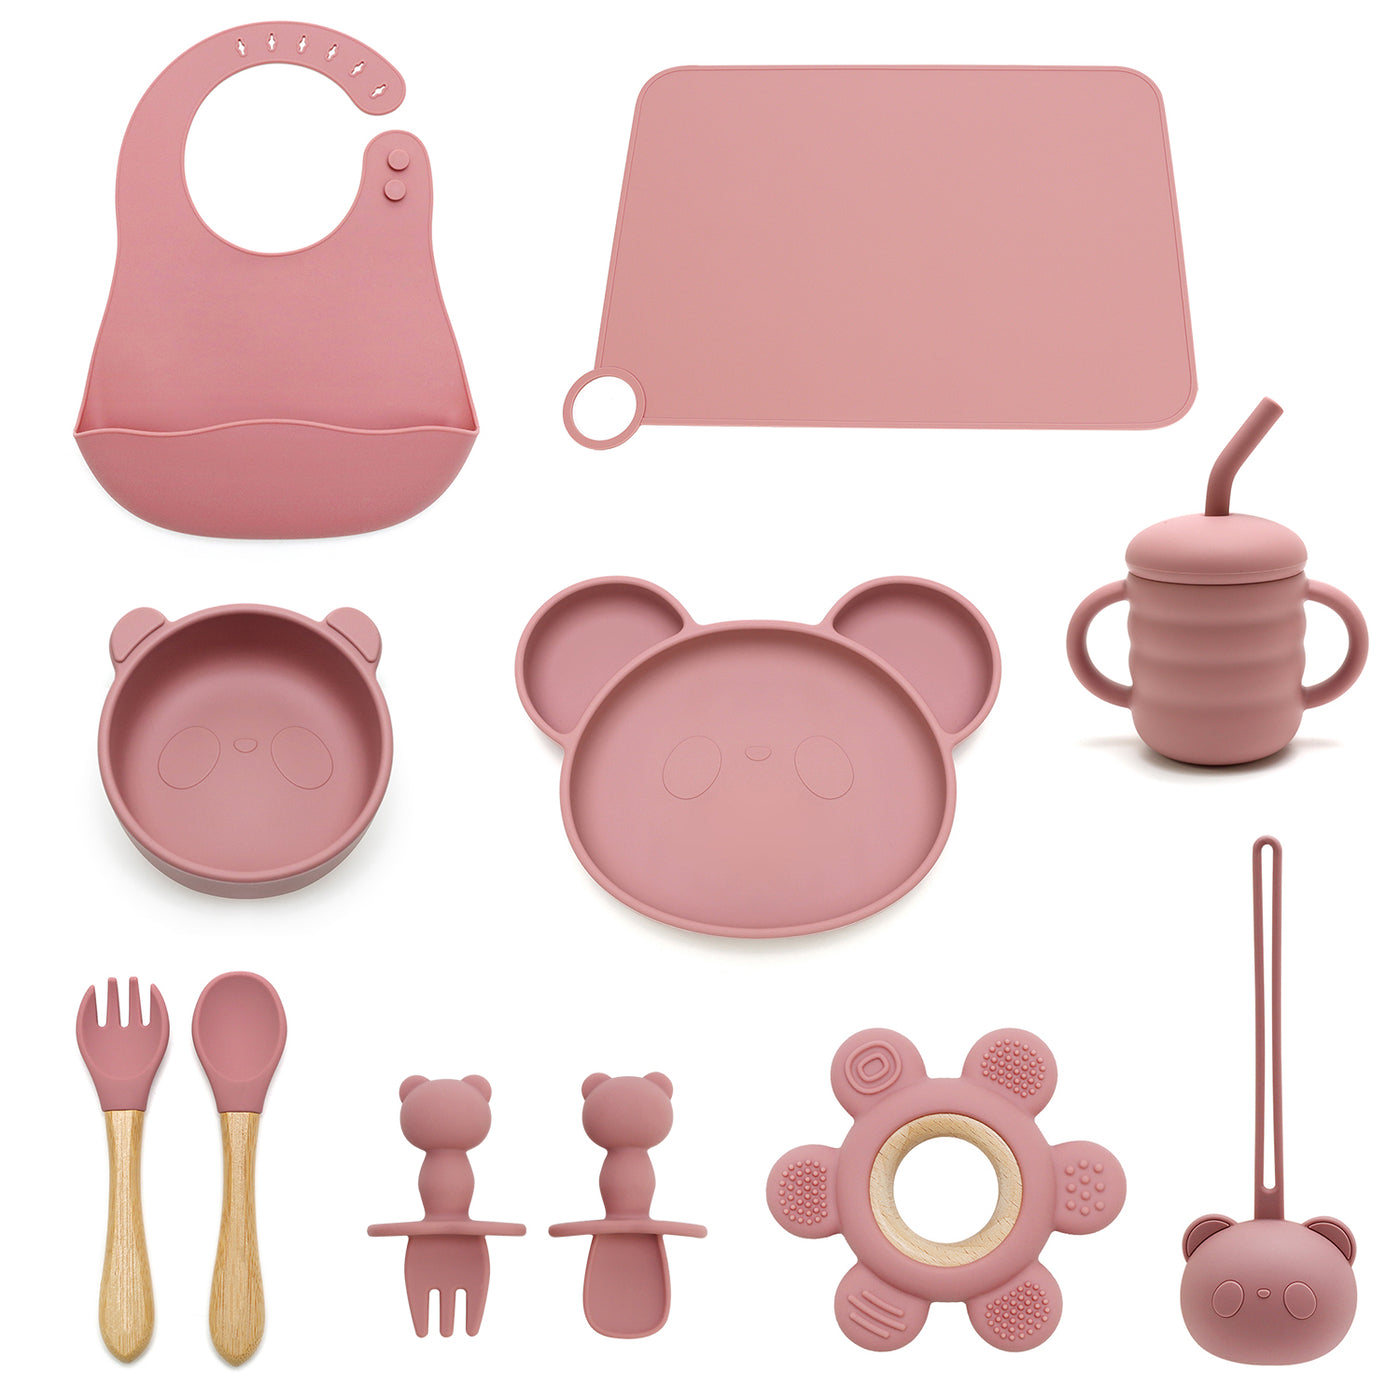 ROSE 11 PIECE SILICONE BABY AND TODDLER NON-SLIP SUCTION CUP FEEDING SET